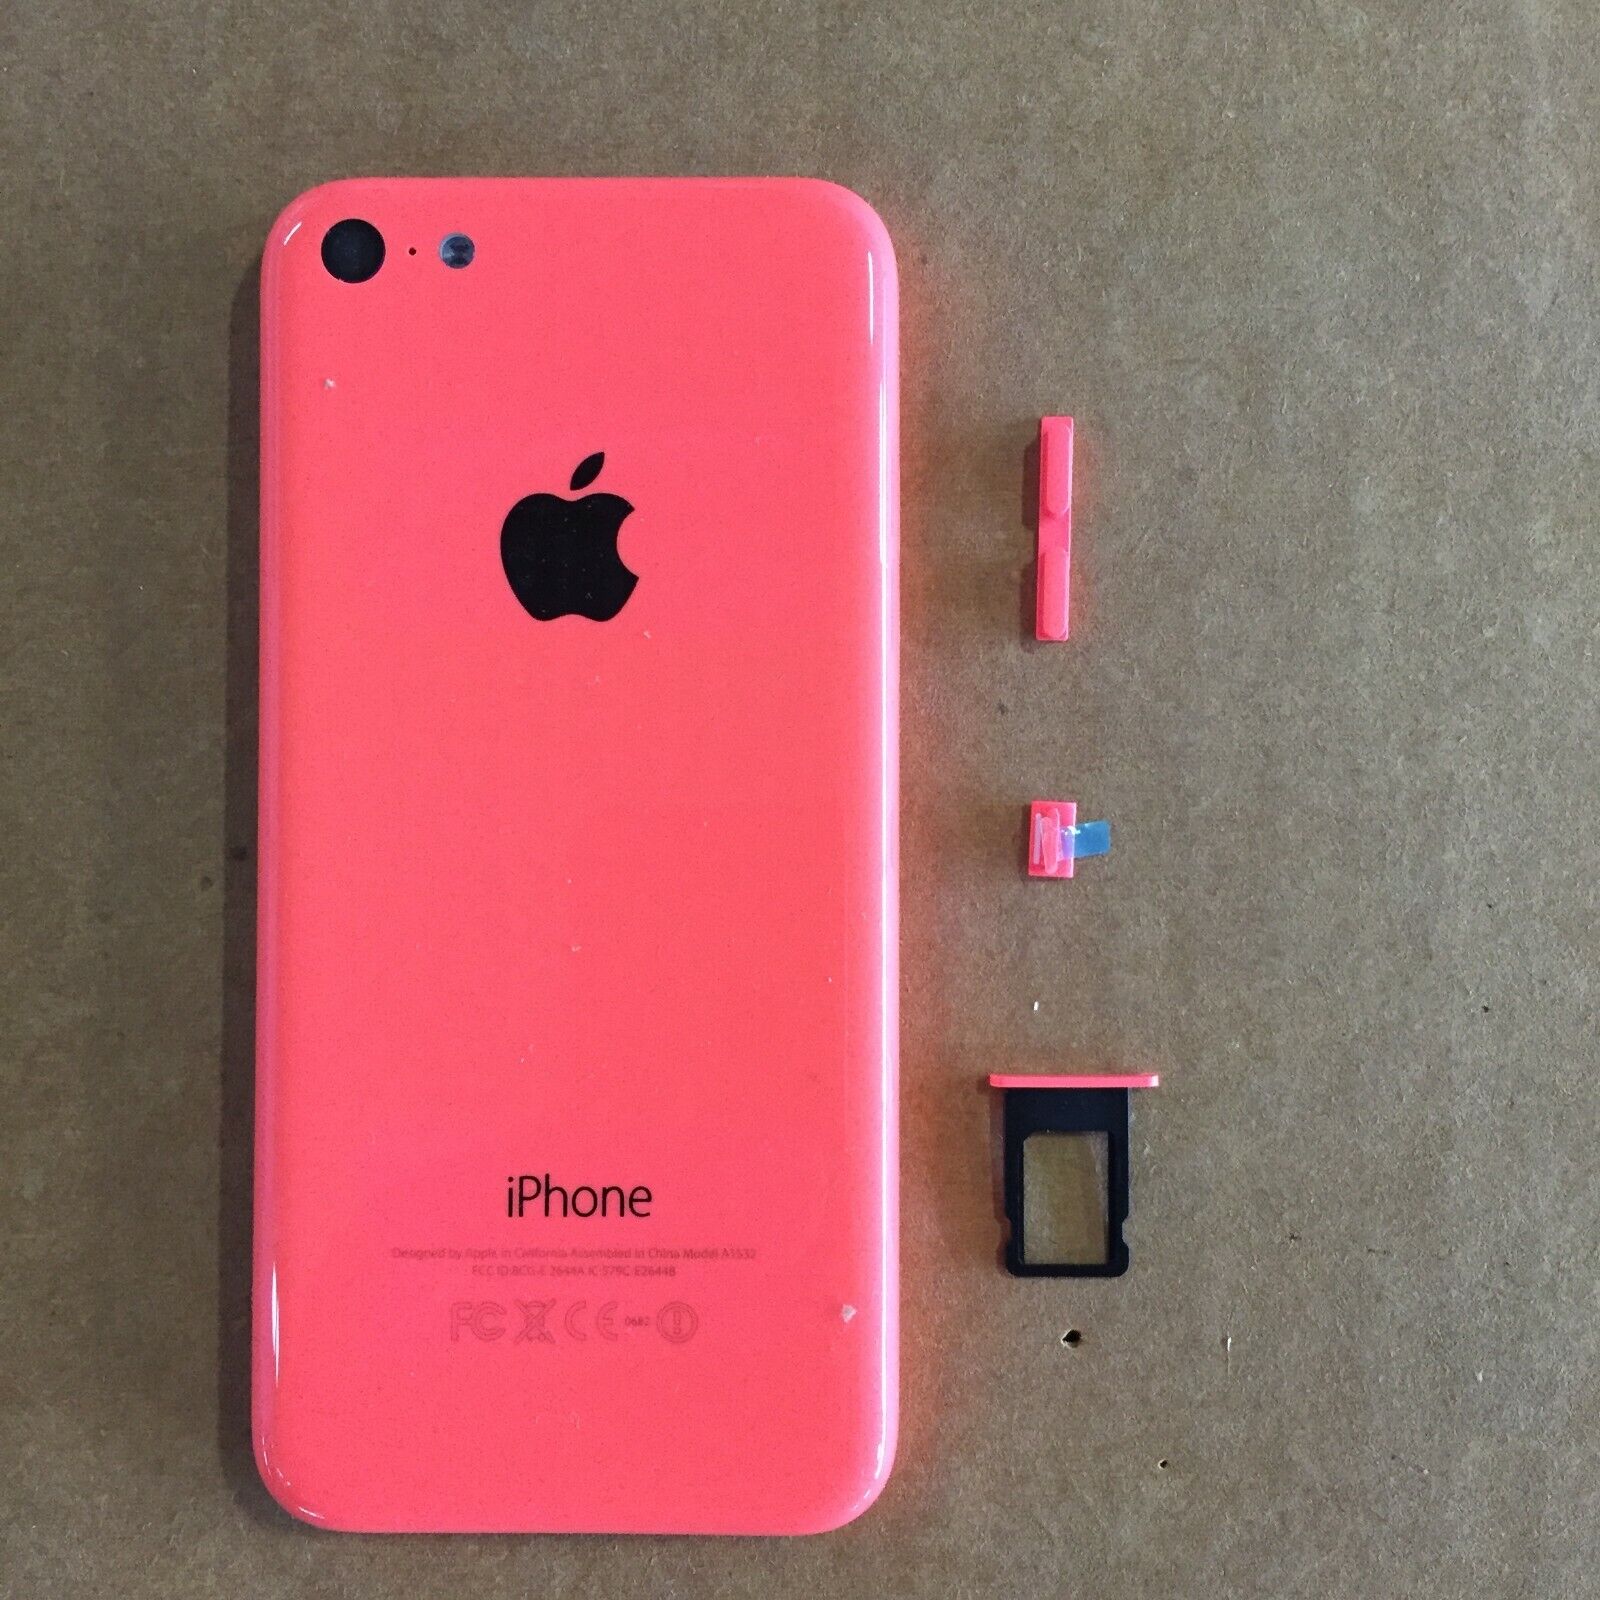 OF 24 Iphone 5c Pink New With Small Only | eBay